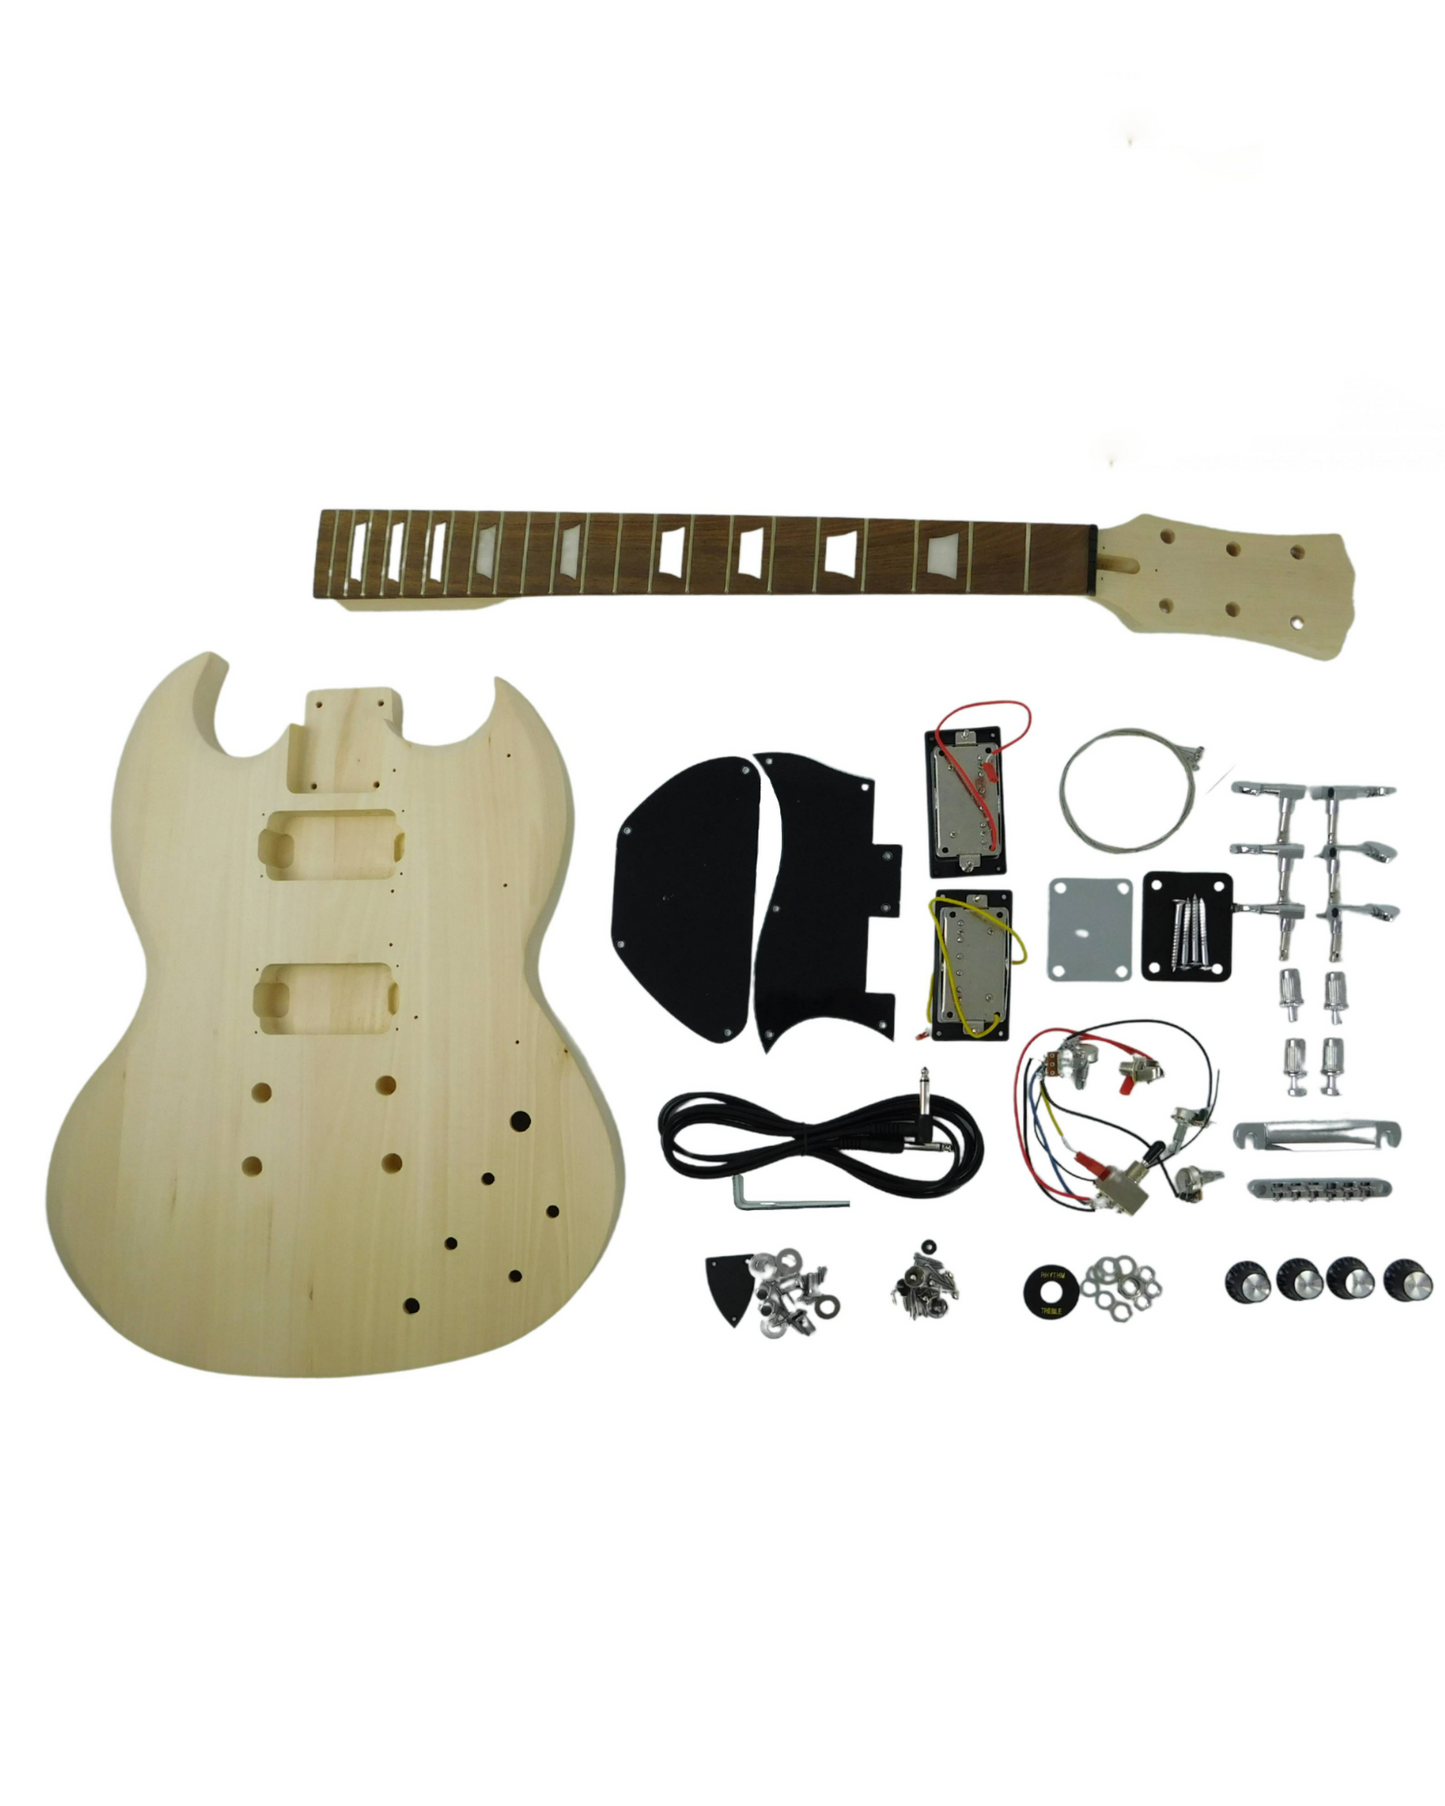 Haze SG Electric Guitar DIY, Solid Basswood body and Maple neck, No-Soldering, HSSG19200DIY